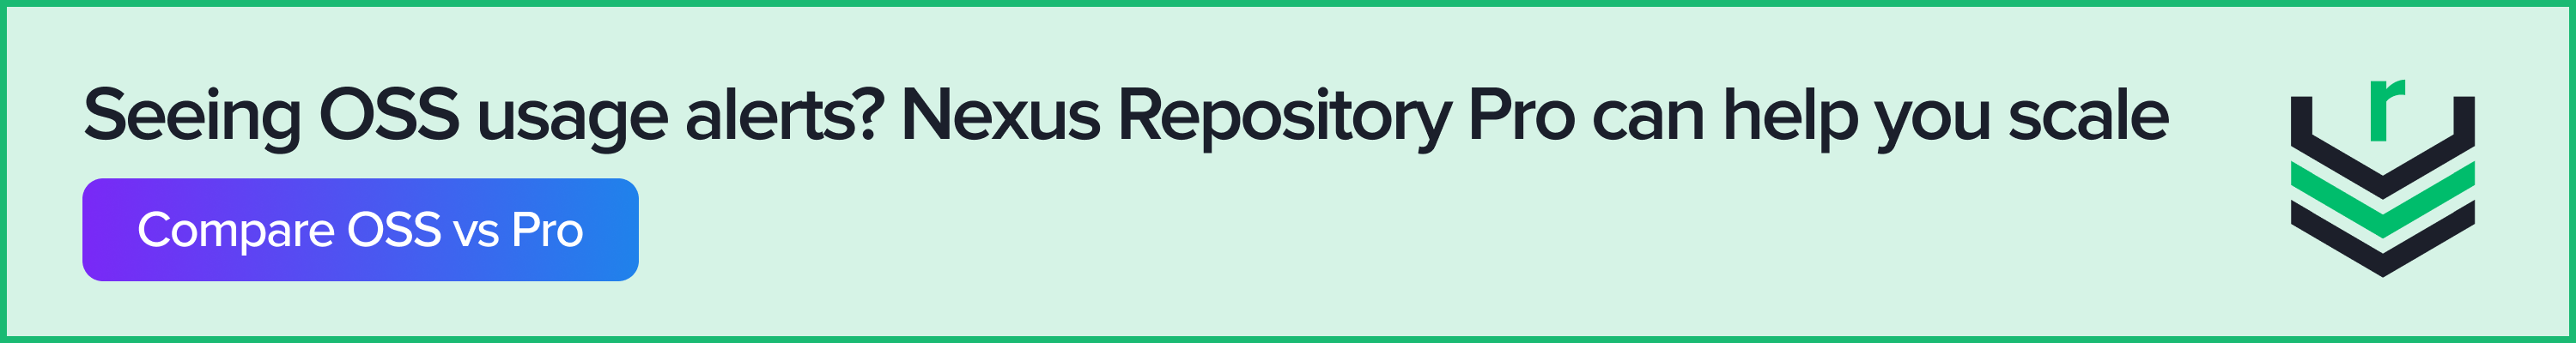 Seeing OSS usage alerts? Nexus Repository PRO can help you scale.